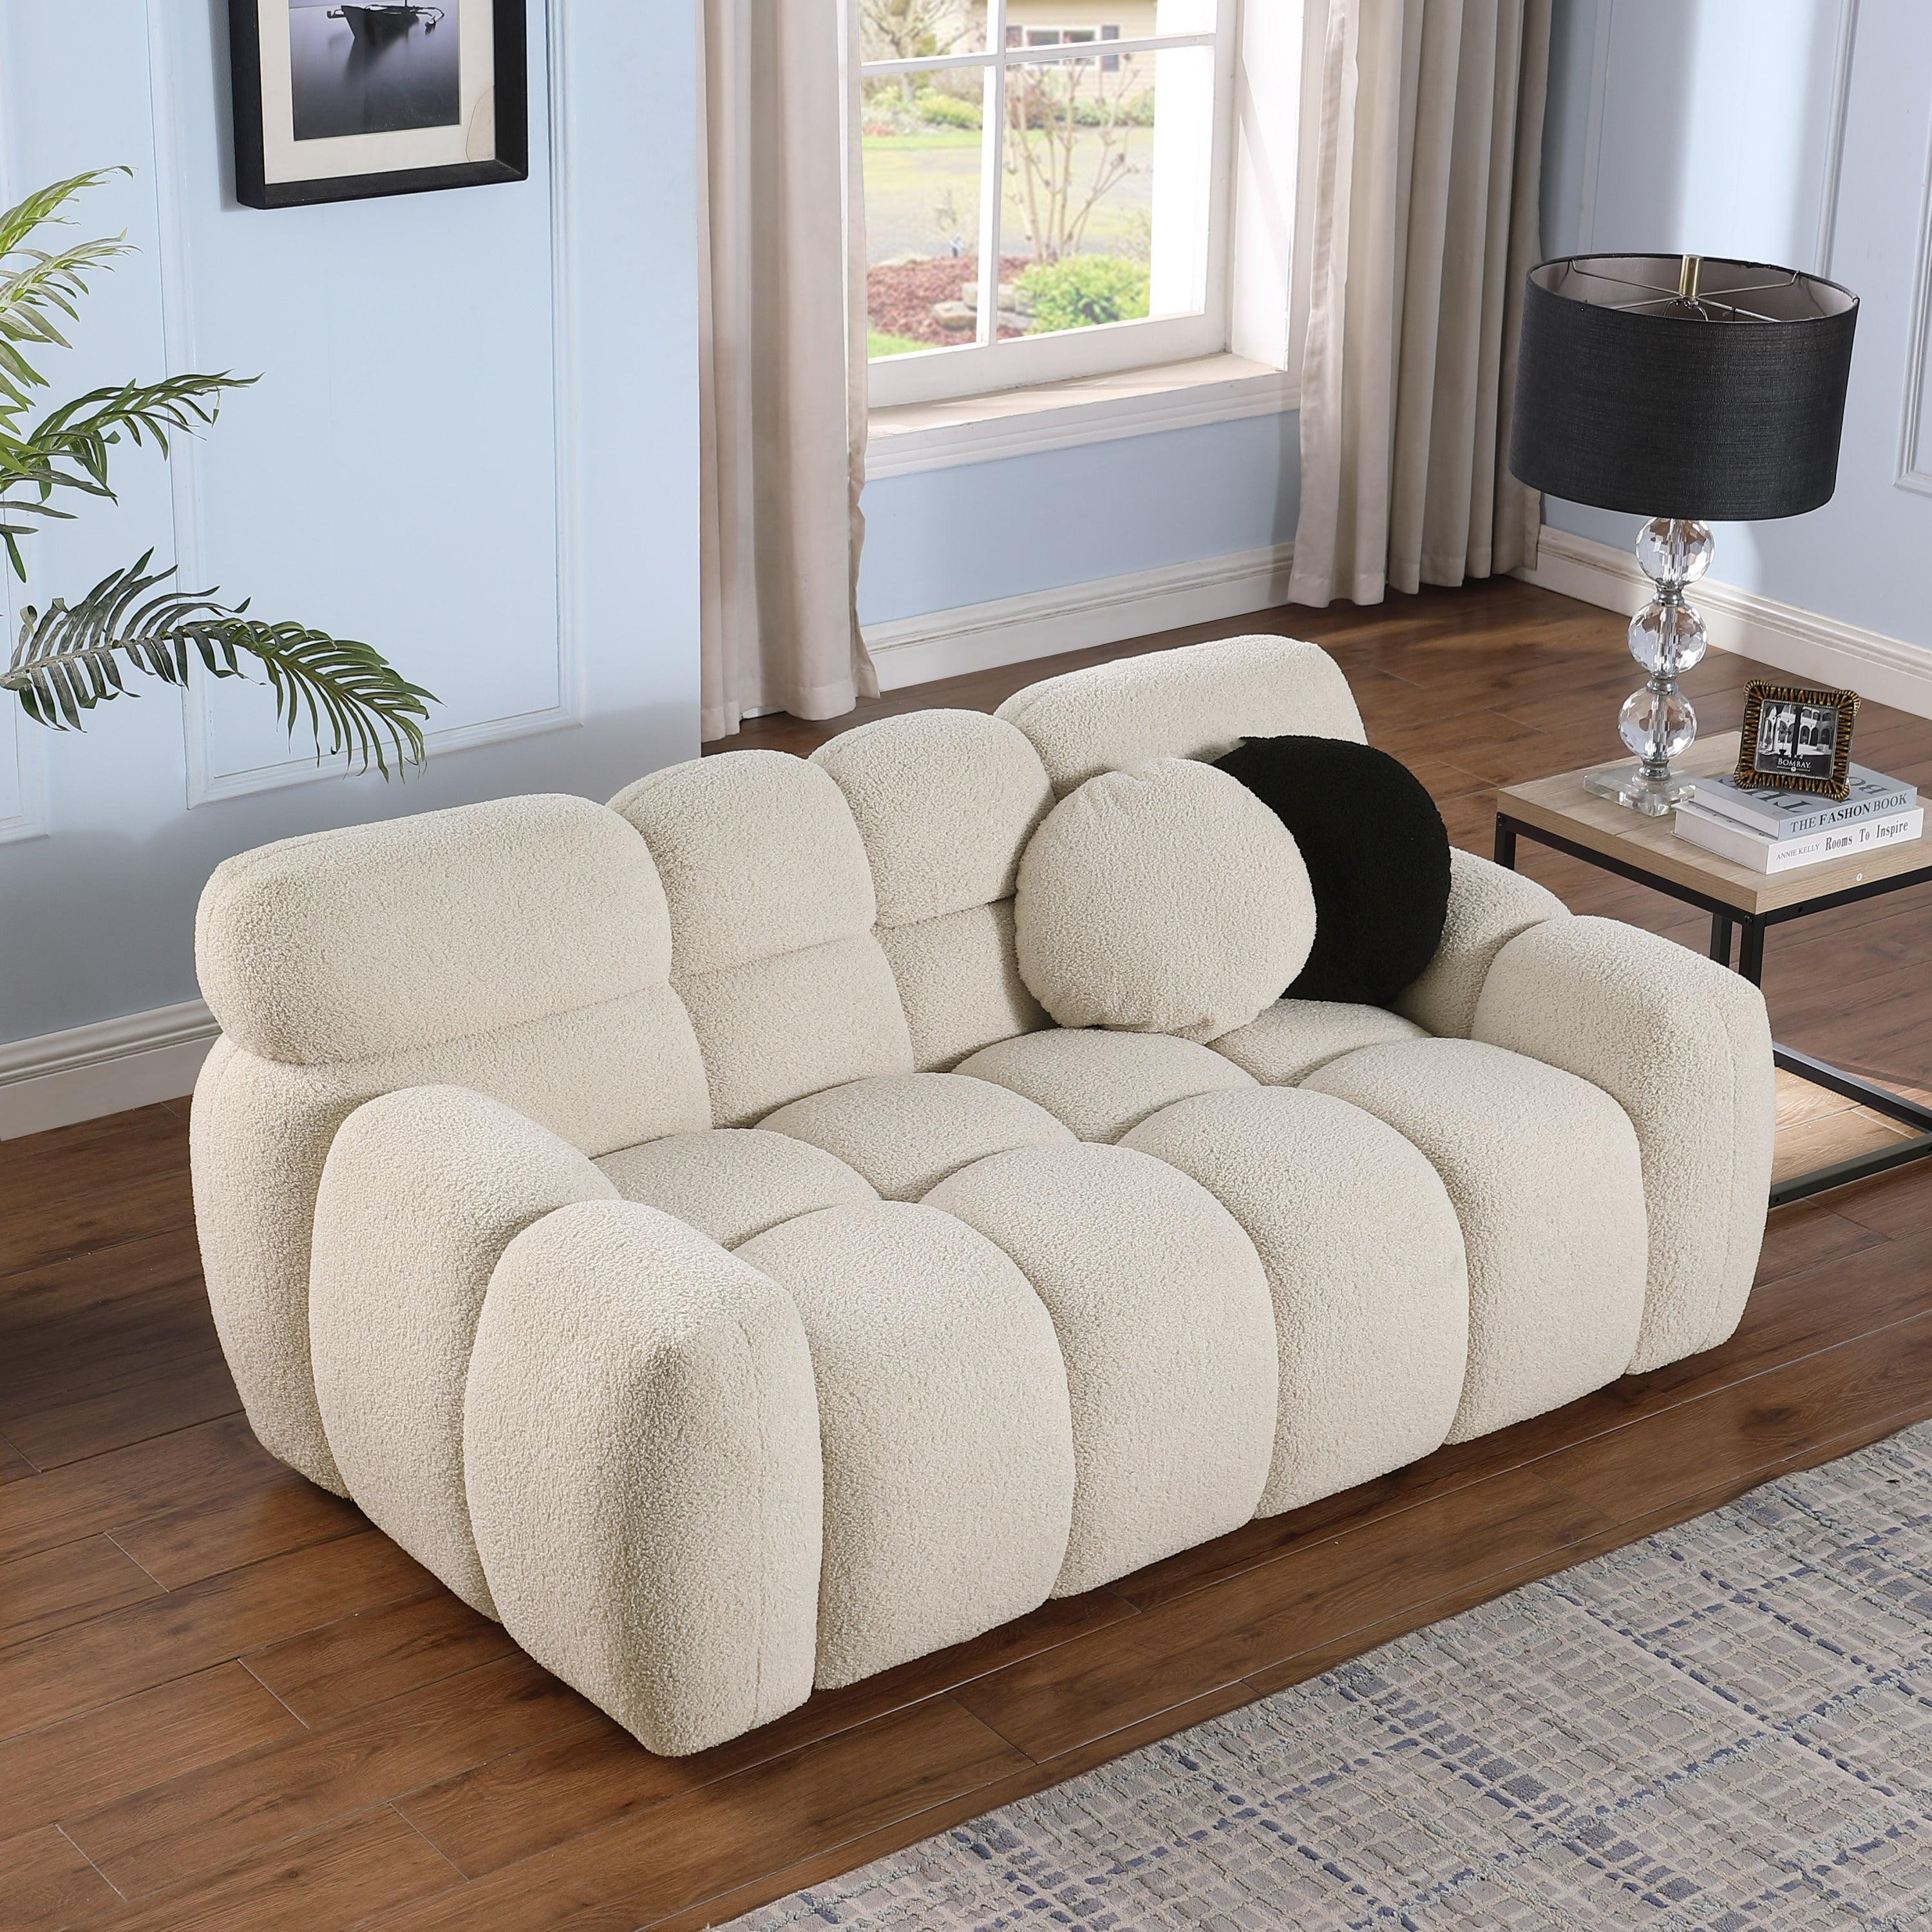 🆓🚛 64.96 Length, 35.83" Deepth, Human Body Structure for Usa People, Marshmallow Sofa, Boucle Sofa, 2 Seater, Beige